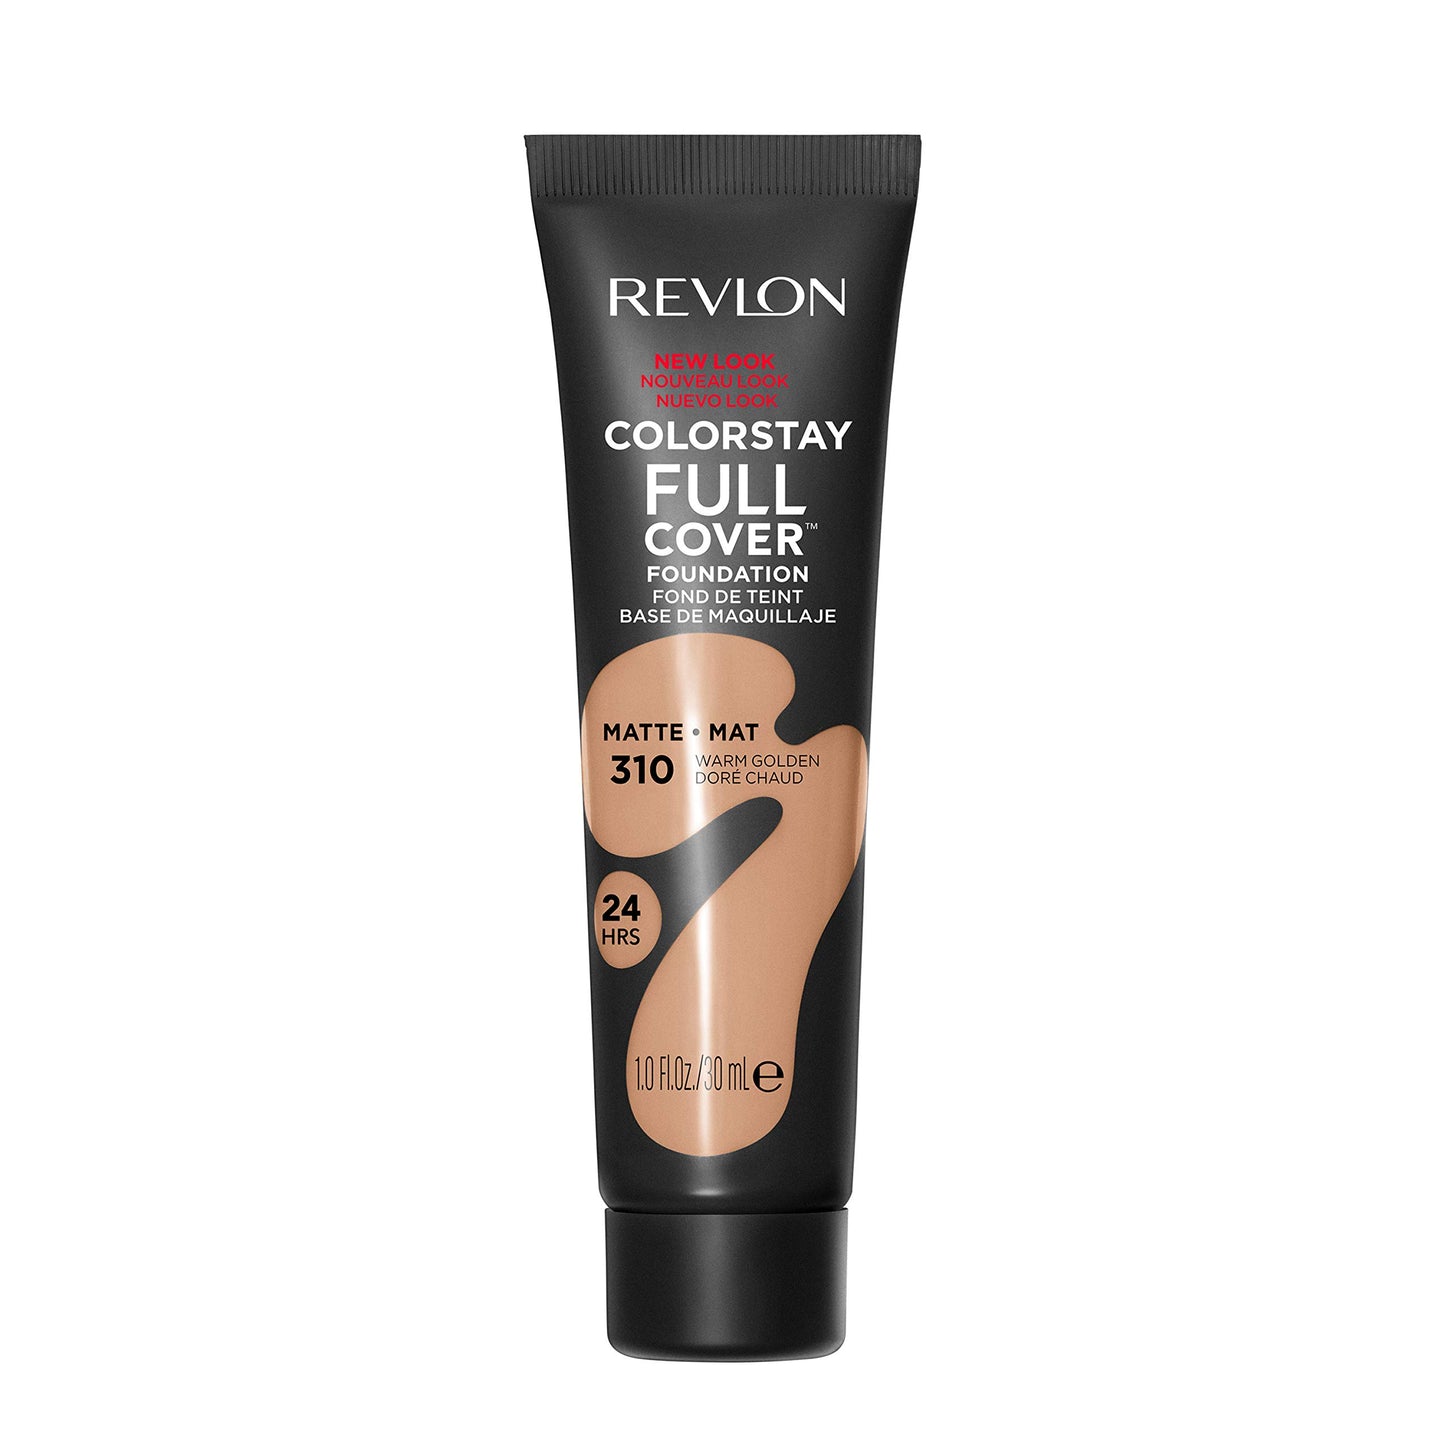 Revlon Liquid Foundation, ColorStay Face Makeup for Normal and Dry Skin, Longwear Full Coverage with Matte Finish, Oil Free, 310 Warm Golden, 1.0 Oz